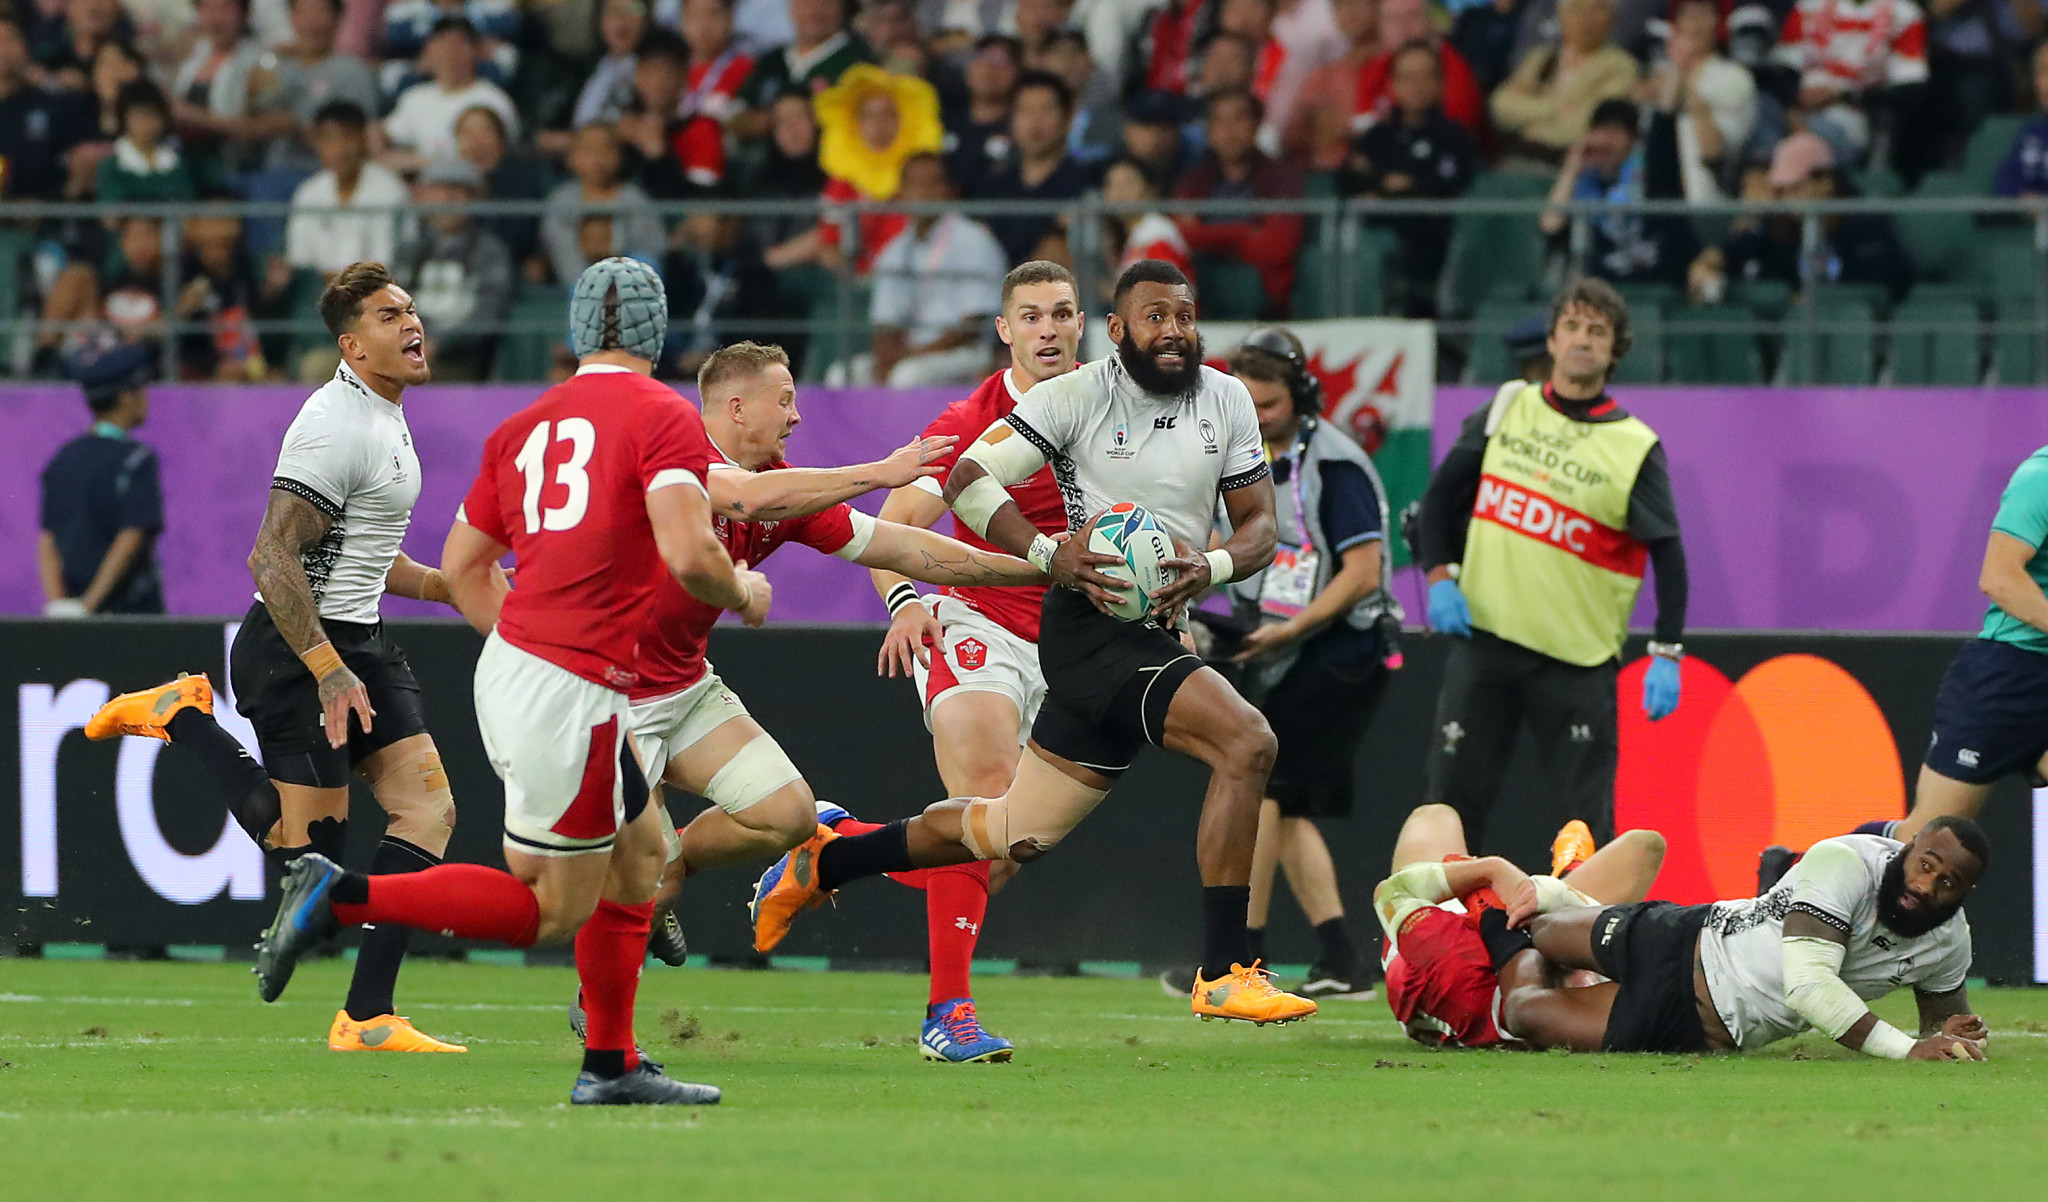 Fiji's backs caused the Welsh defence problems all game ©Getty Images